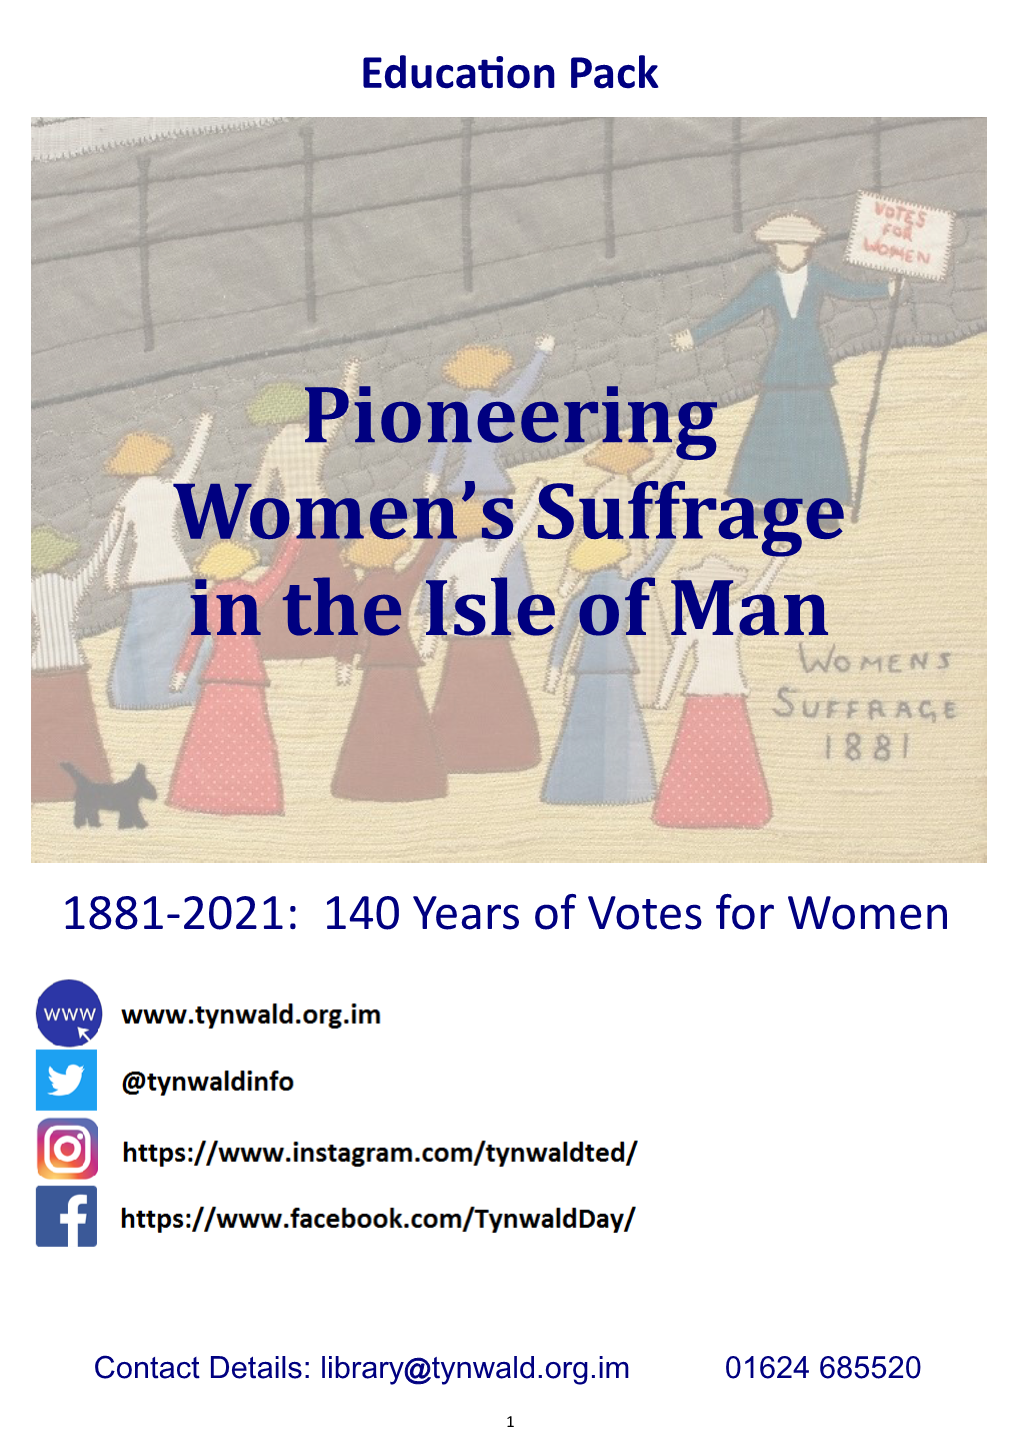 Pioneering Women's Suffrage in the Isle Of